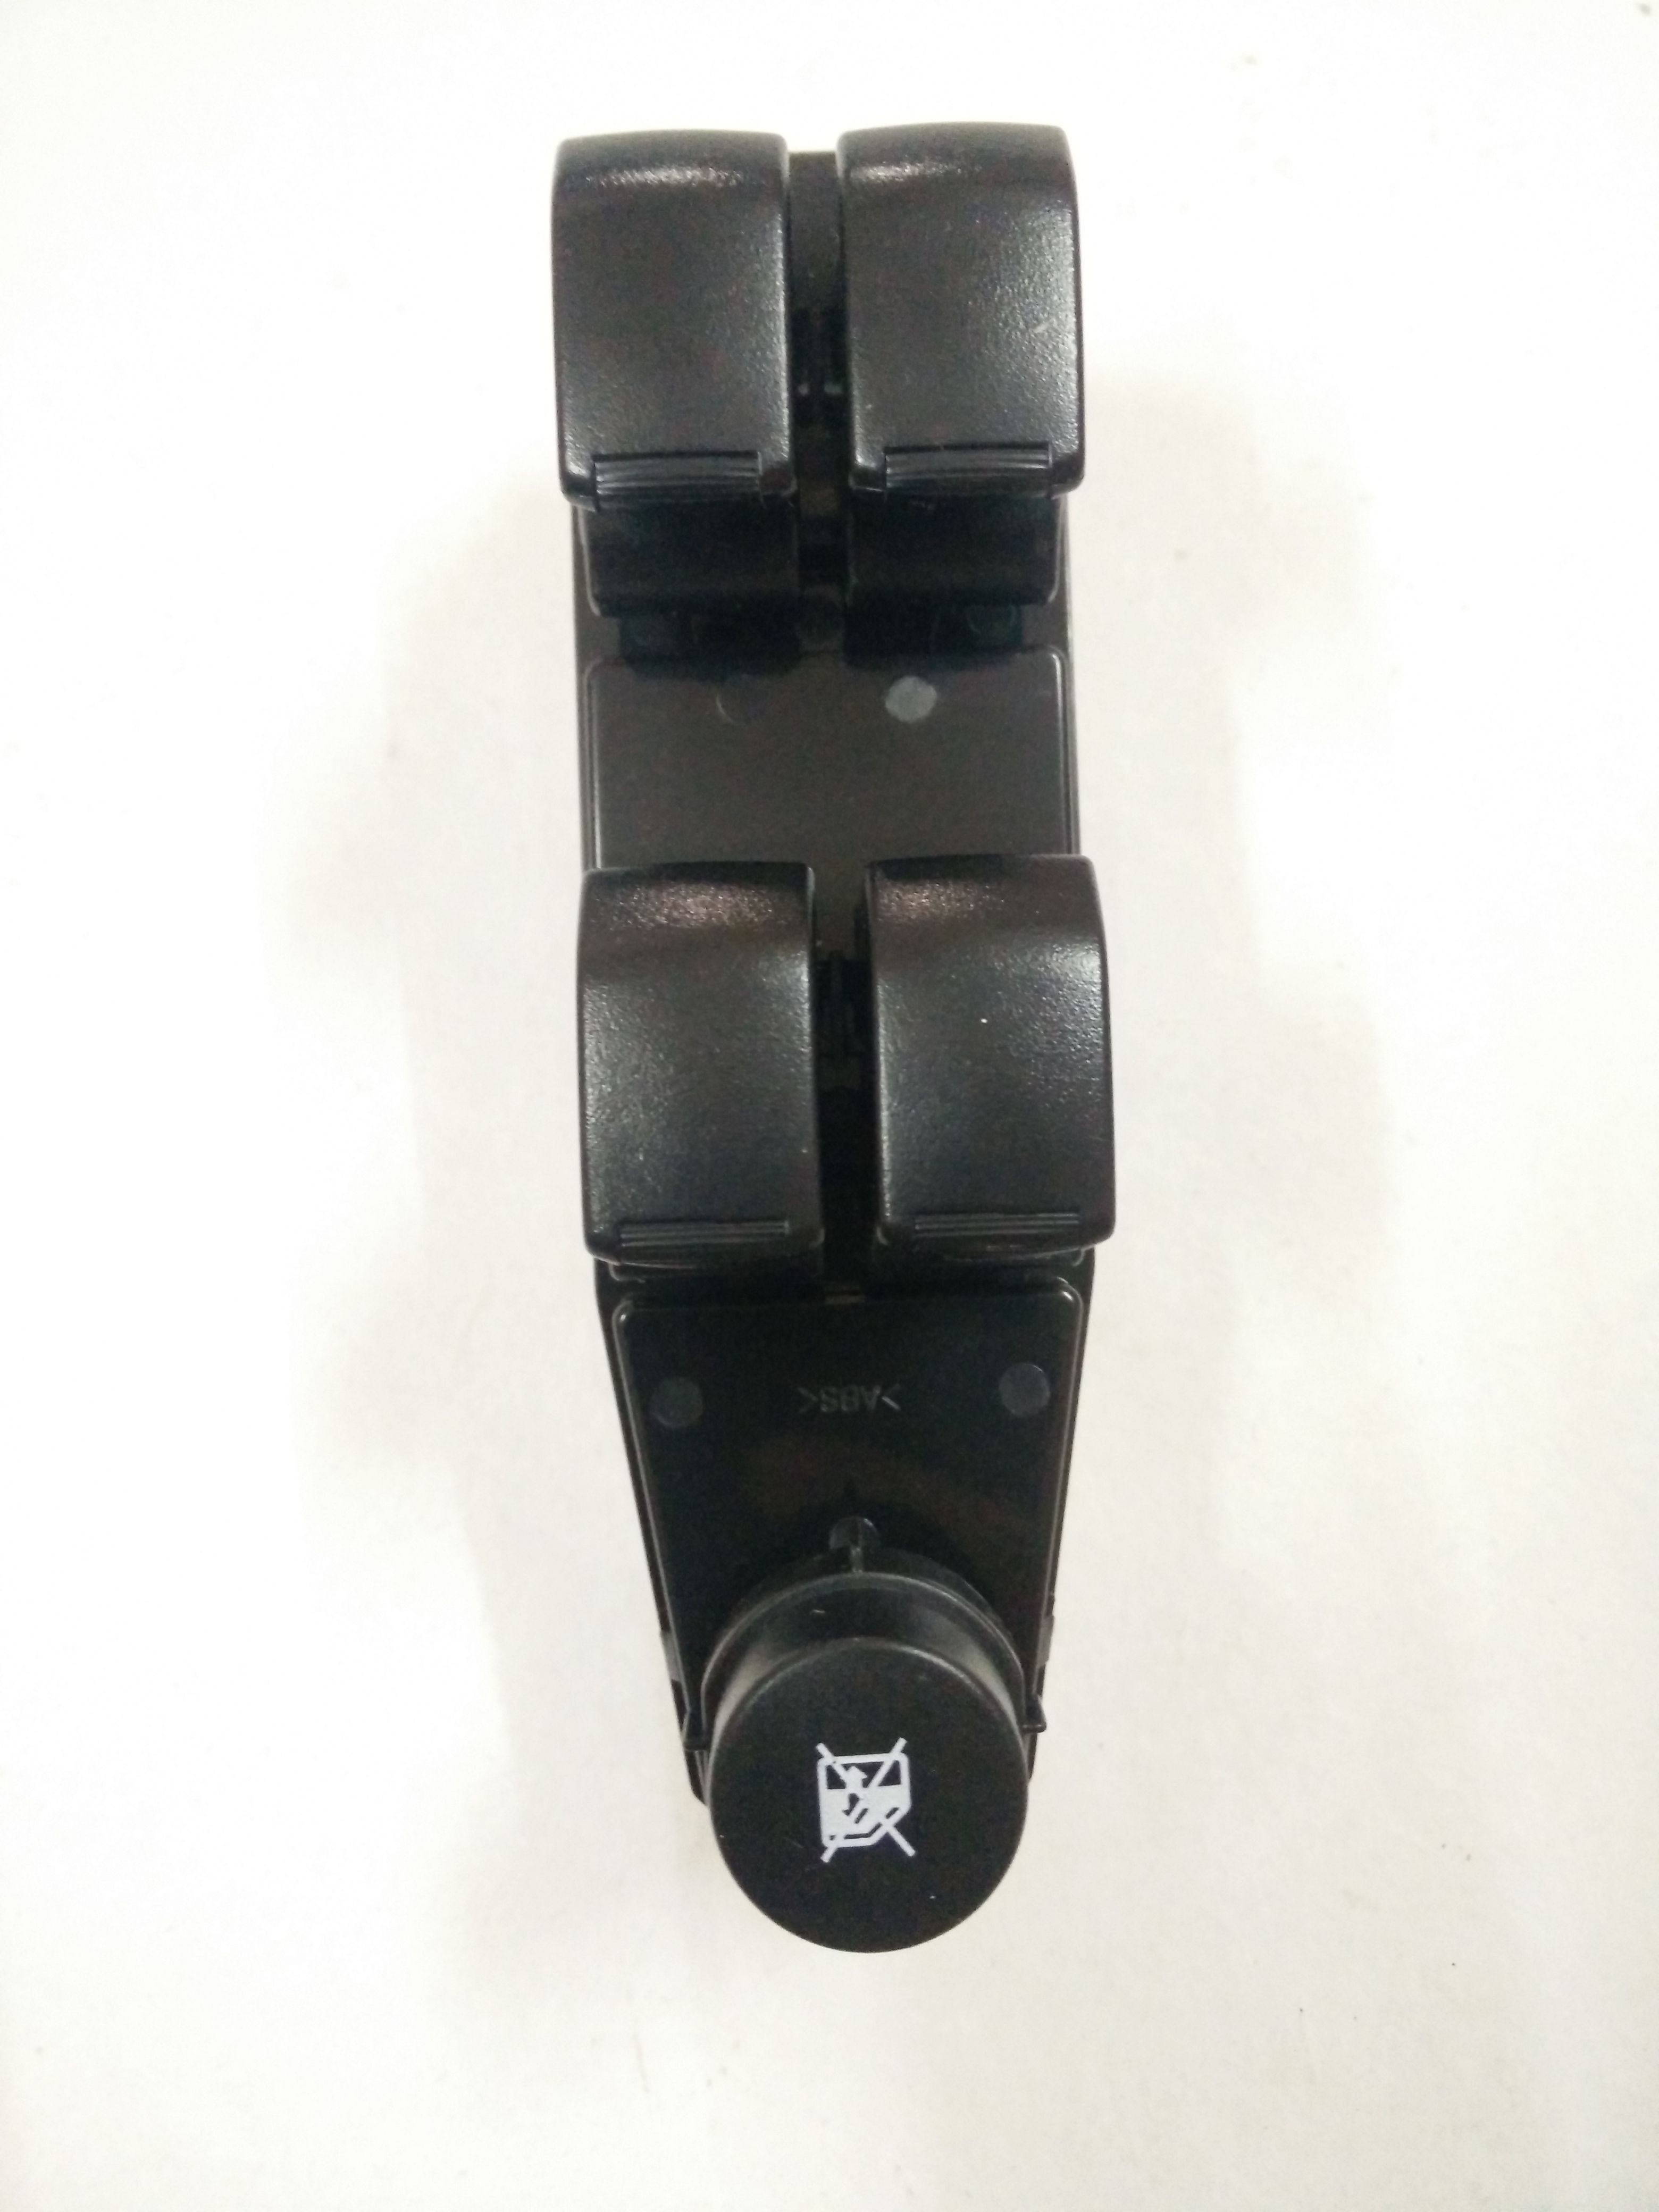 POWER WINDOW SWITCH FOR CHEVROLET SPARK (FRONT RIGHT)